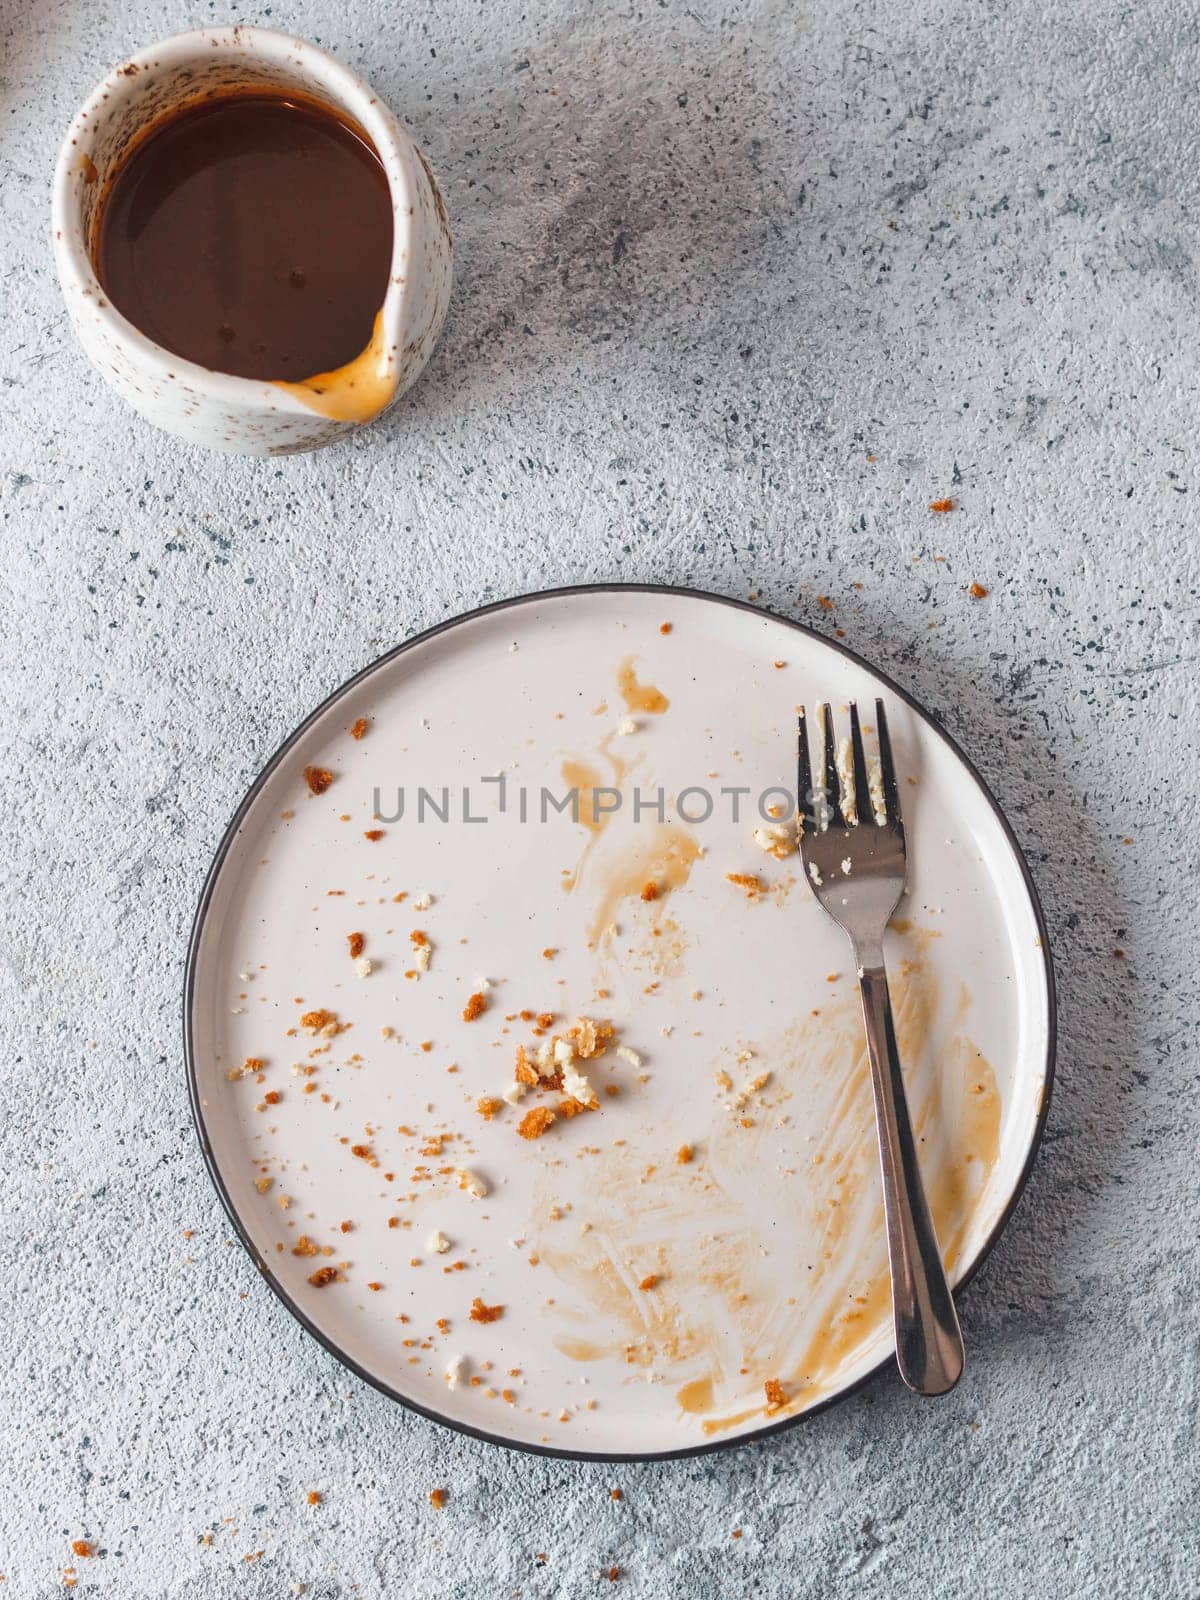 Empty dirty dish after cheesecake with dessert fork. Caramel sauce in sauceboat. White rustic trendy modern fashionable dirty plate on gray cement background, top view or flat lay. Copy space for text